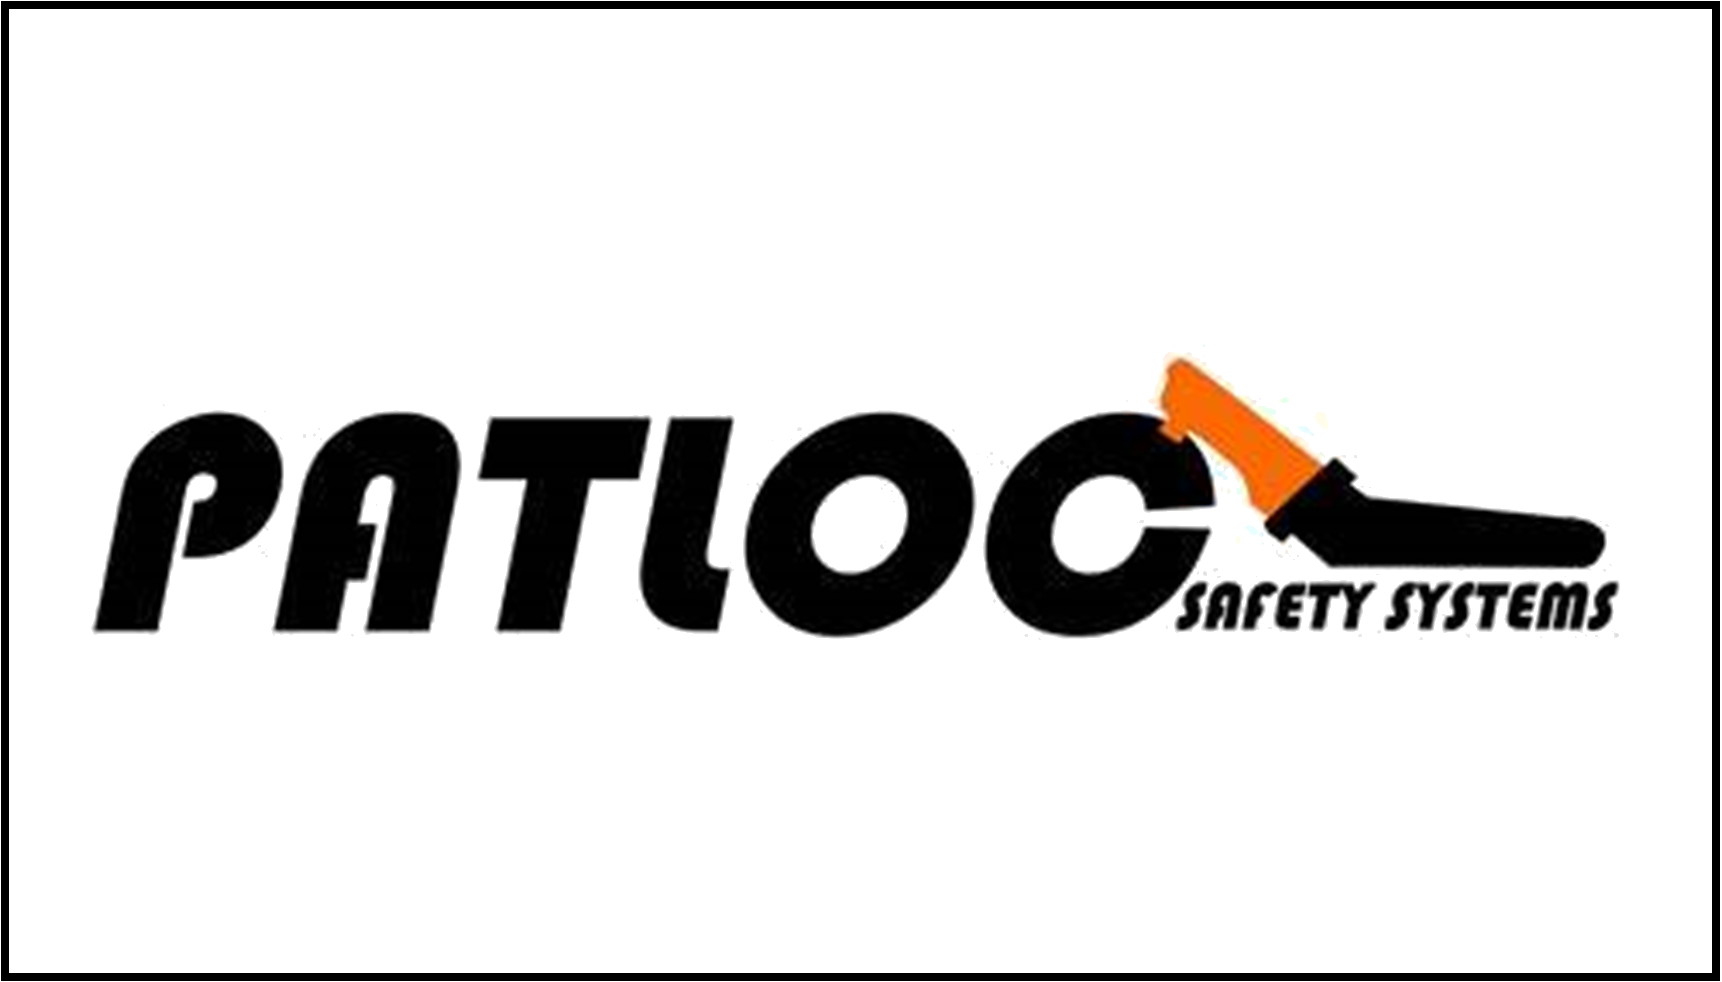 Patloc Safety Systems